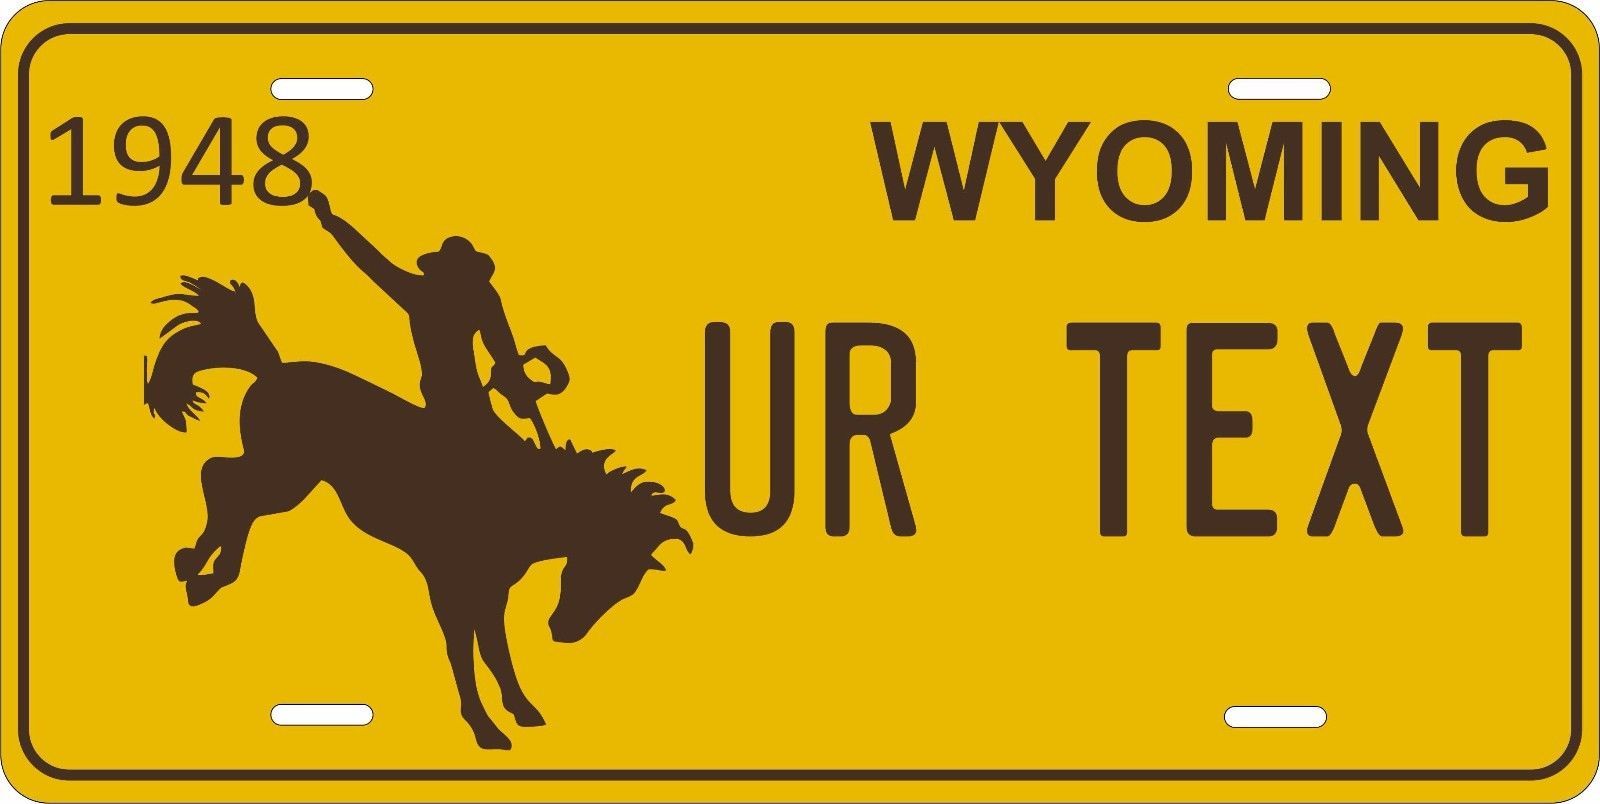 Wyoming 1948 License Plate Personalized Custom Auto Bike Motorcycle Moped Tag - $10.99 - $18.22